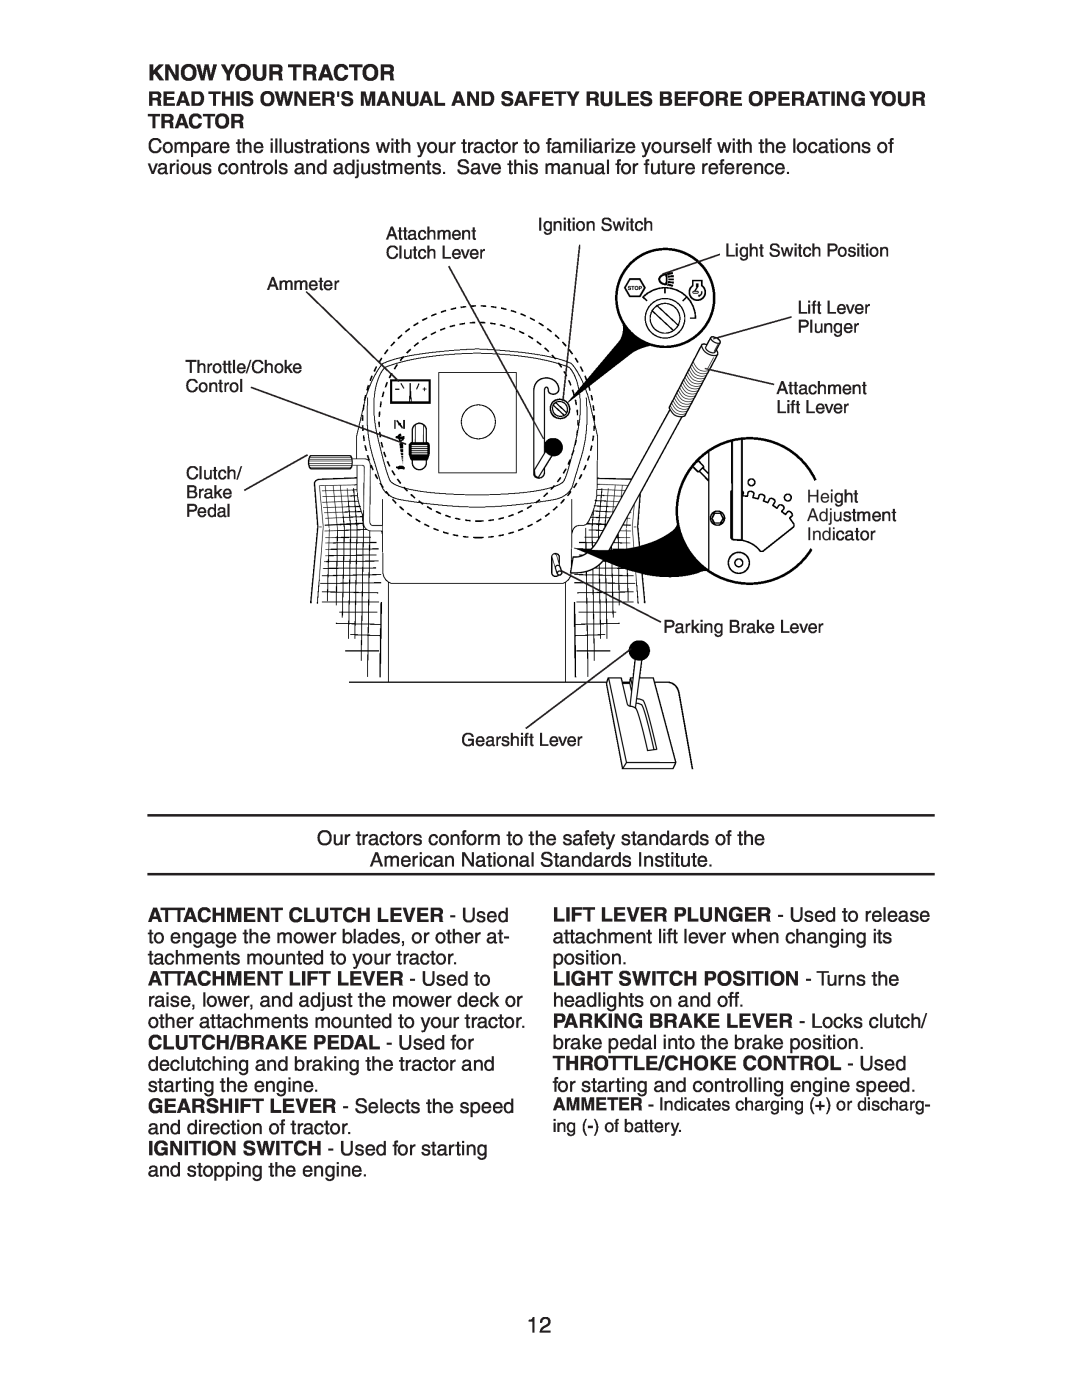 Electrolux AG17542STA manual Know Your Tractor, LIGHT SWITCH POSITION - Turns the headlights on and off 